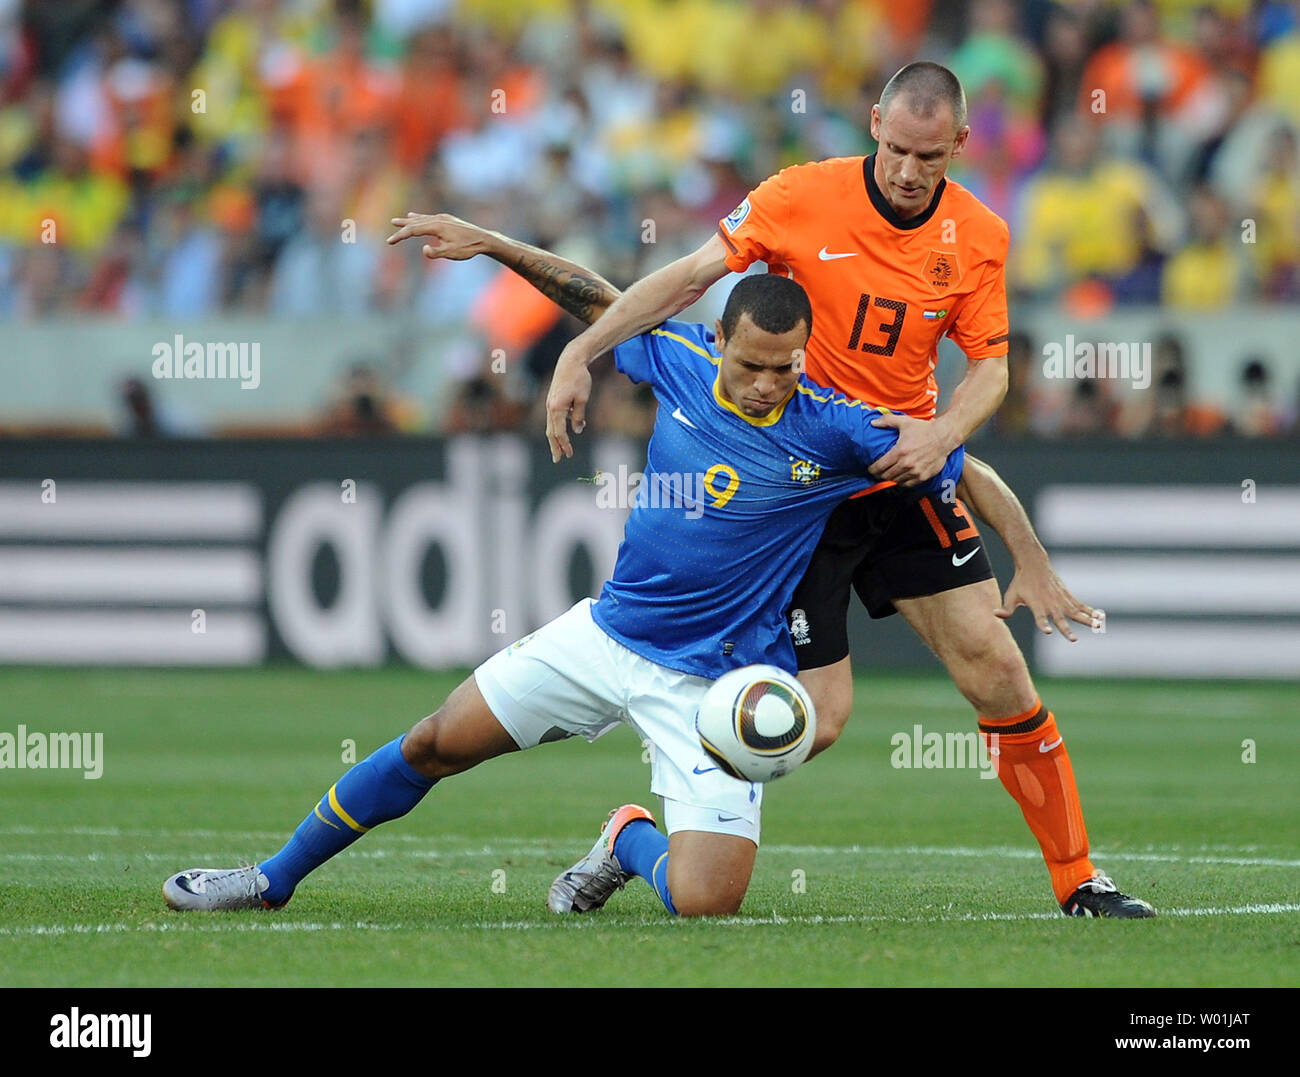 Andre Ooijer of The Netherlands and Luis Fabiano of Brazil chase the ball during the FIFA World Cup Quarter Final match at the Nelson Mandela Bay Stadium in Port Elizabeth, South Africa on July 2, 2010. The Netherlands beat Brazil 2-1. UPI/Chris Brunskill Stock Photo